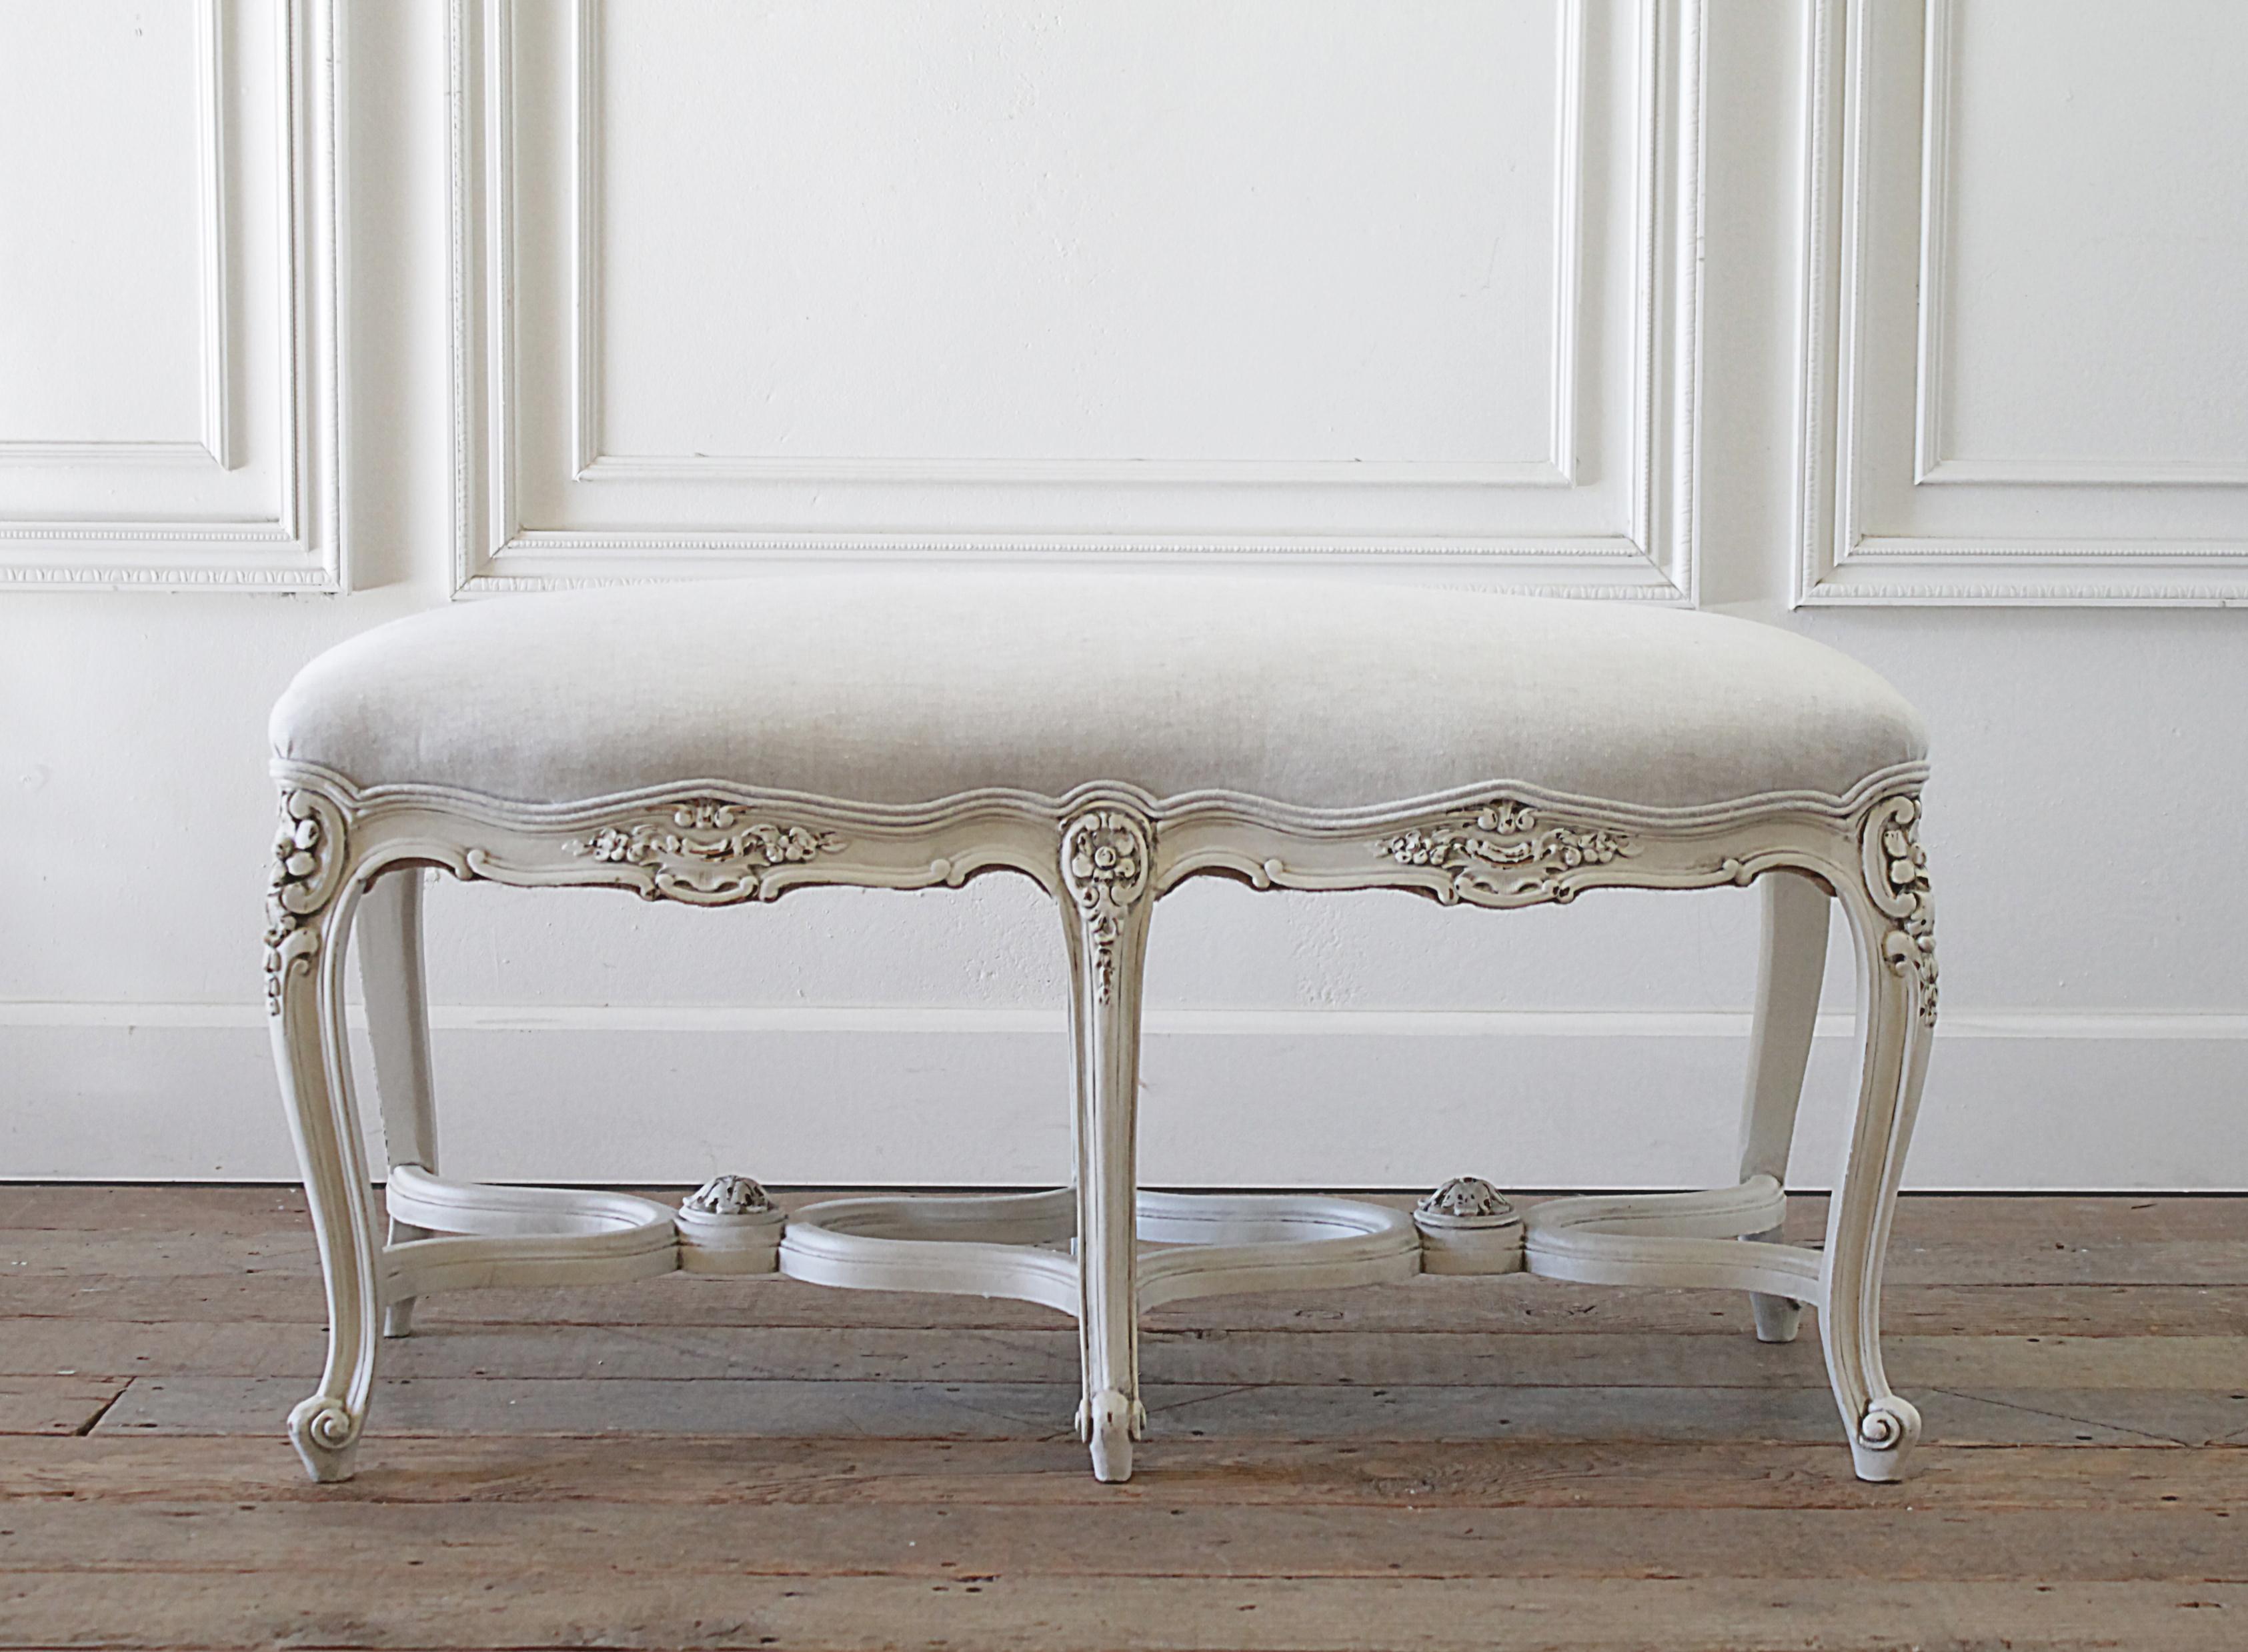 Antique Louis XV style bench with natural linen upholstery. We painted this bench in a soft white color with subtle distressed edges, and finished the upholstery with a 100% pure Belgian linen in a light natural greige color. Very solid and sturdy